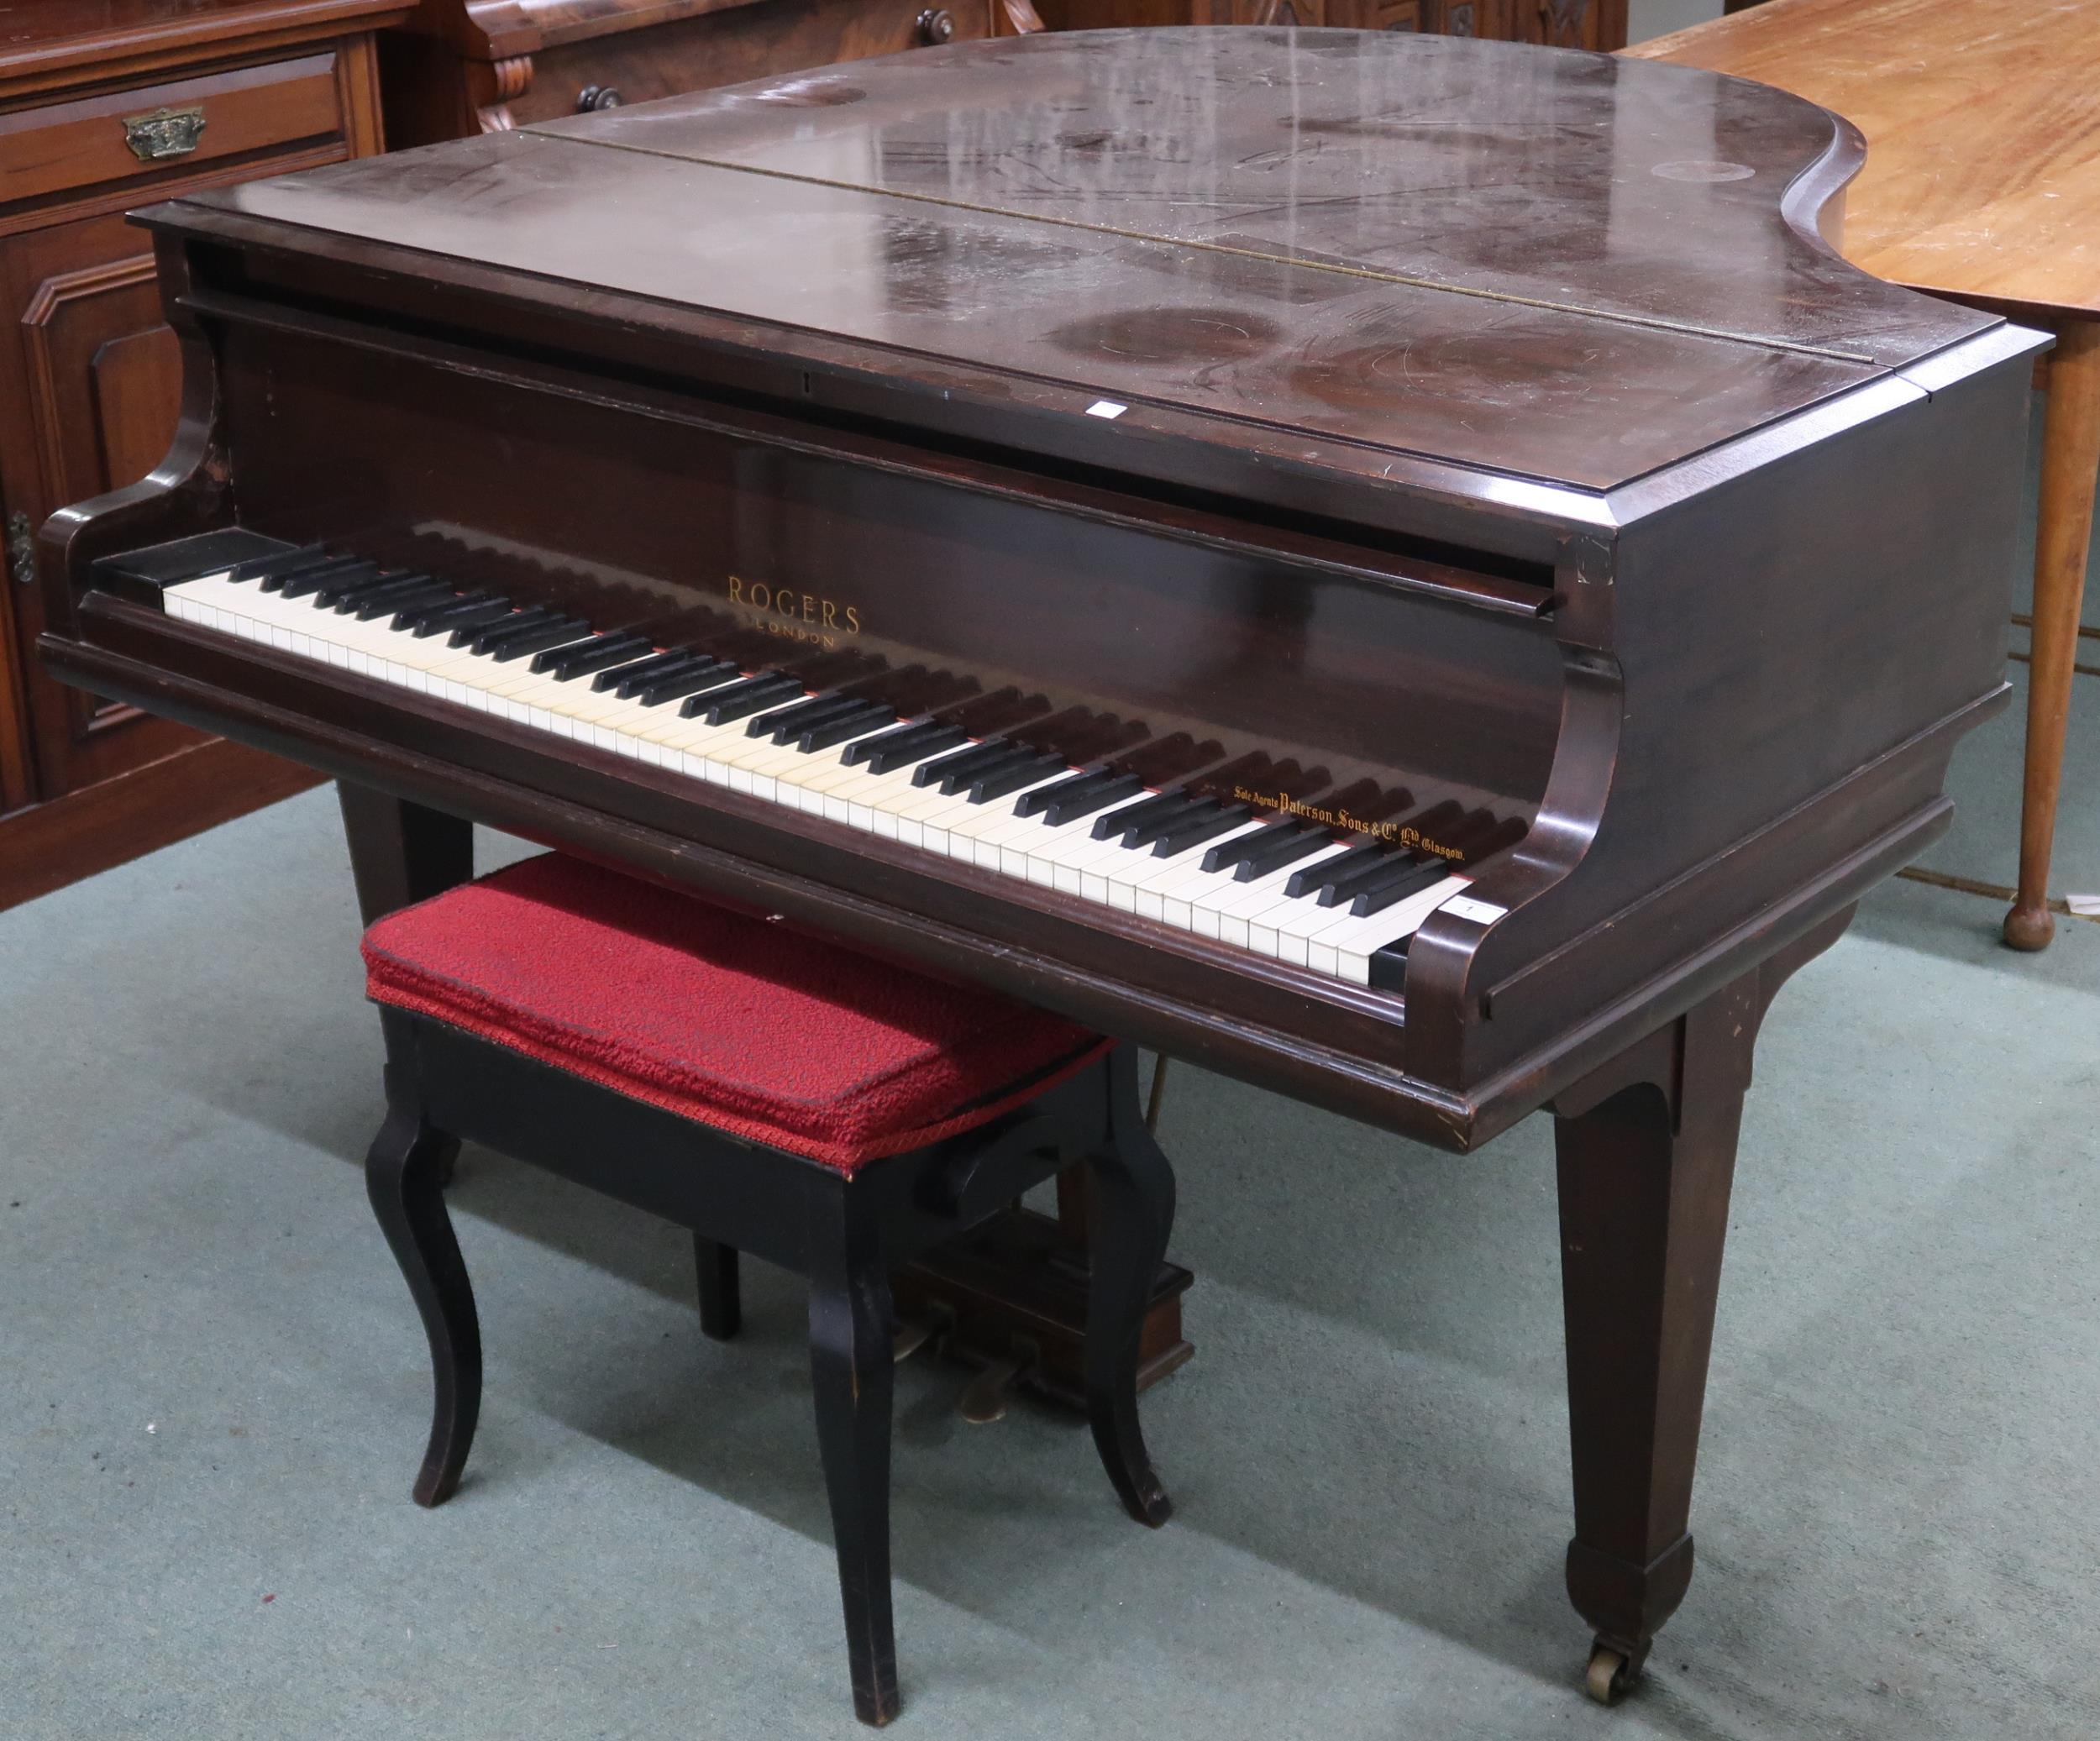 A Victorian mahogany case George Rogers & Sons, London baby grand piano, serial number 48855 and - Image 7 of 7